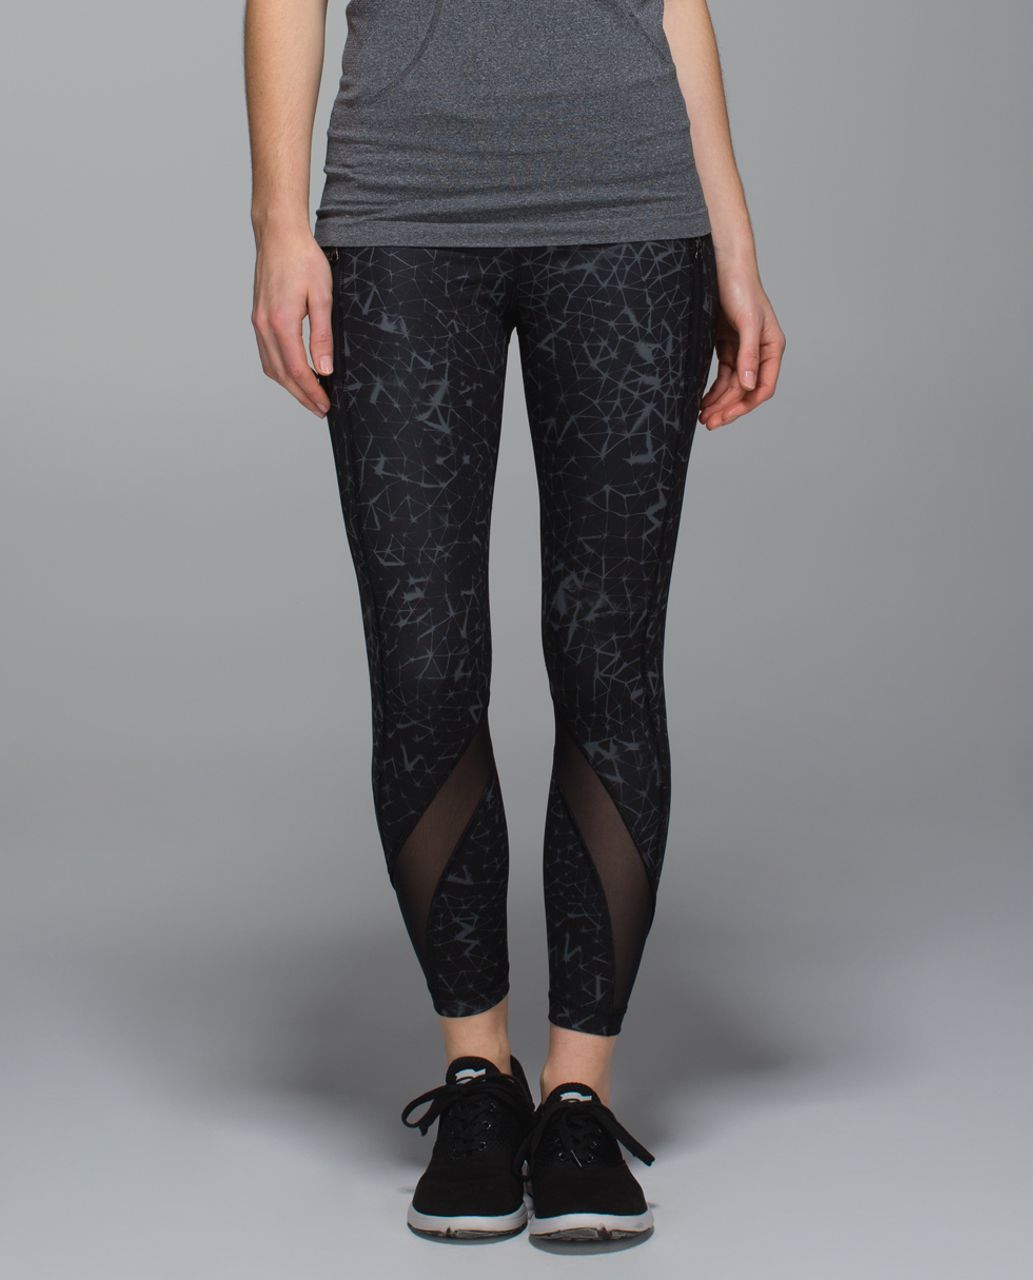 Lululemon Run Inspire Crop II All Luxtreme Heathered Deep Coal Size 10 -  $58 - From Lady